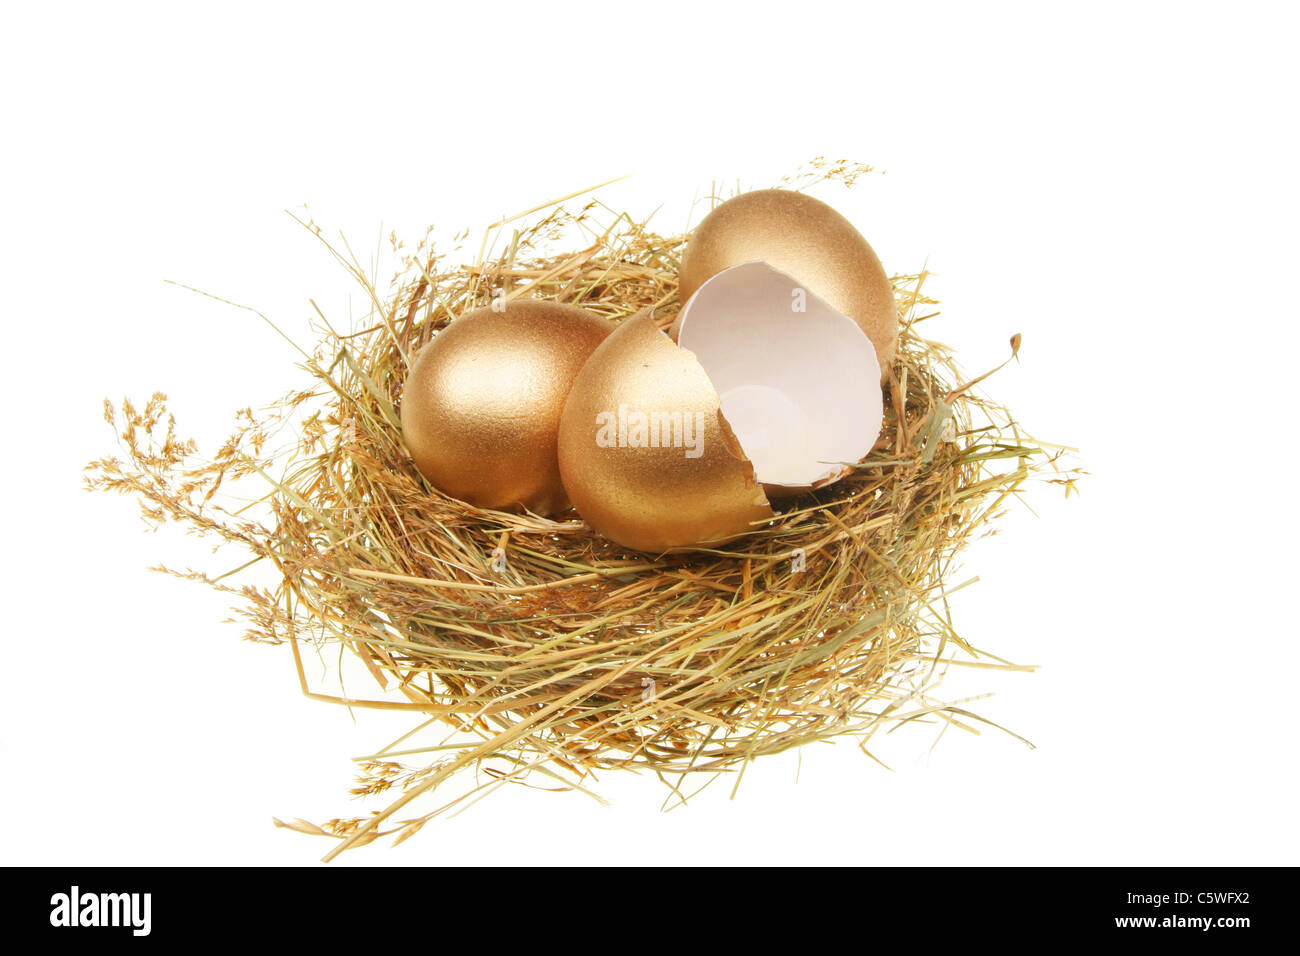 Two whole and one broken golden eggs in a straw nest Stock Photo